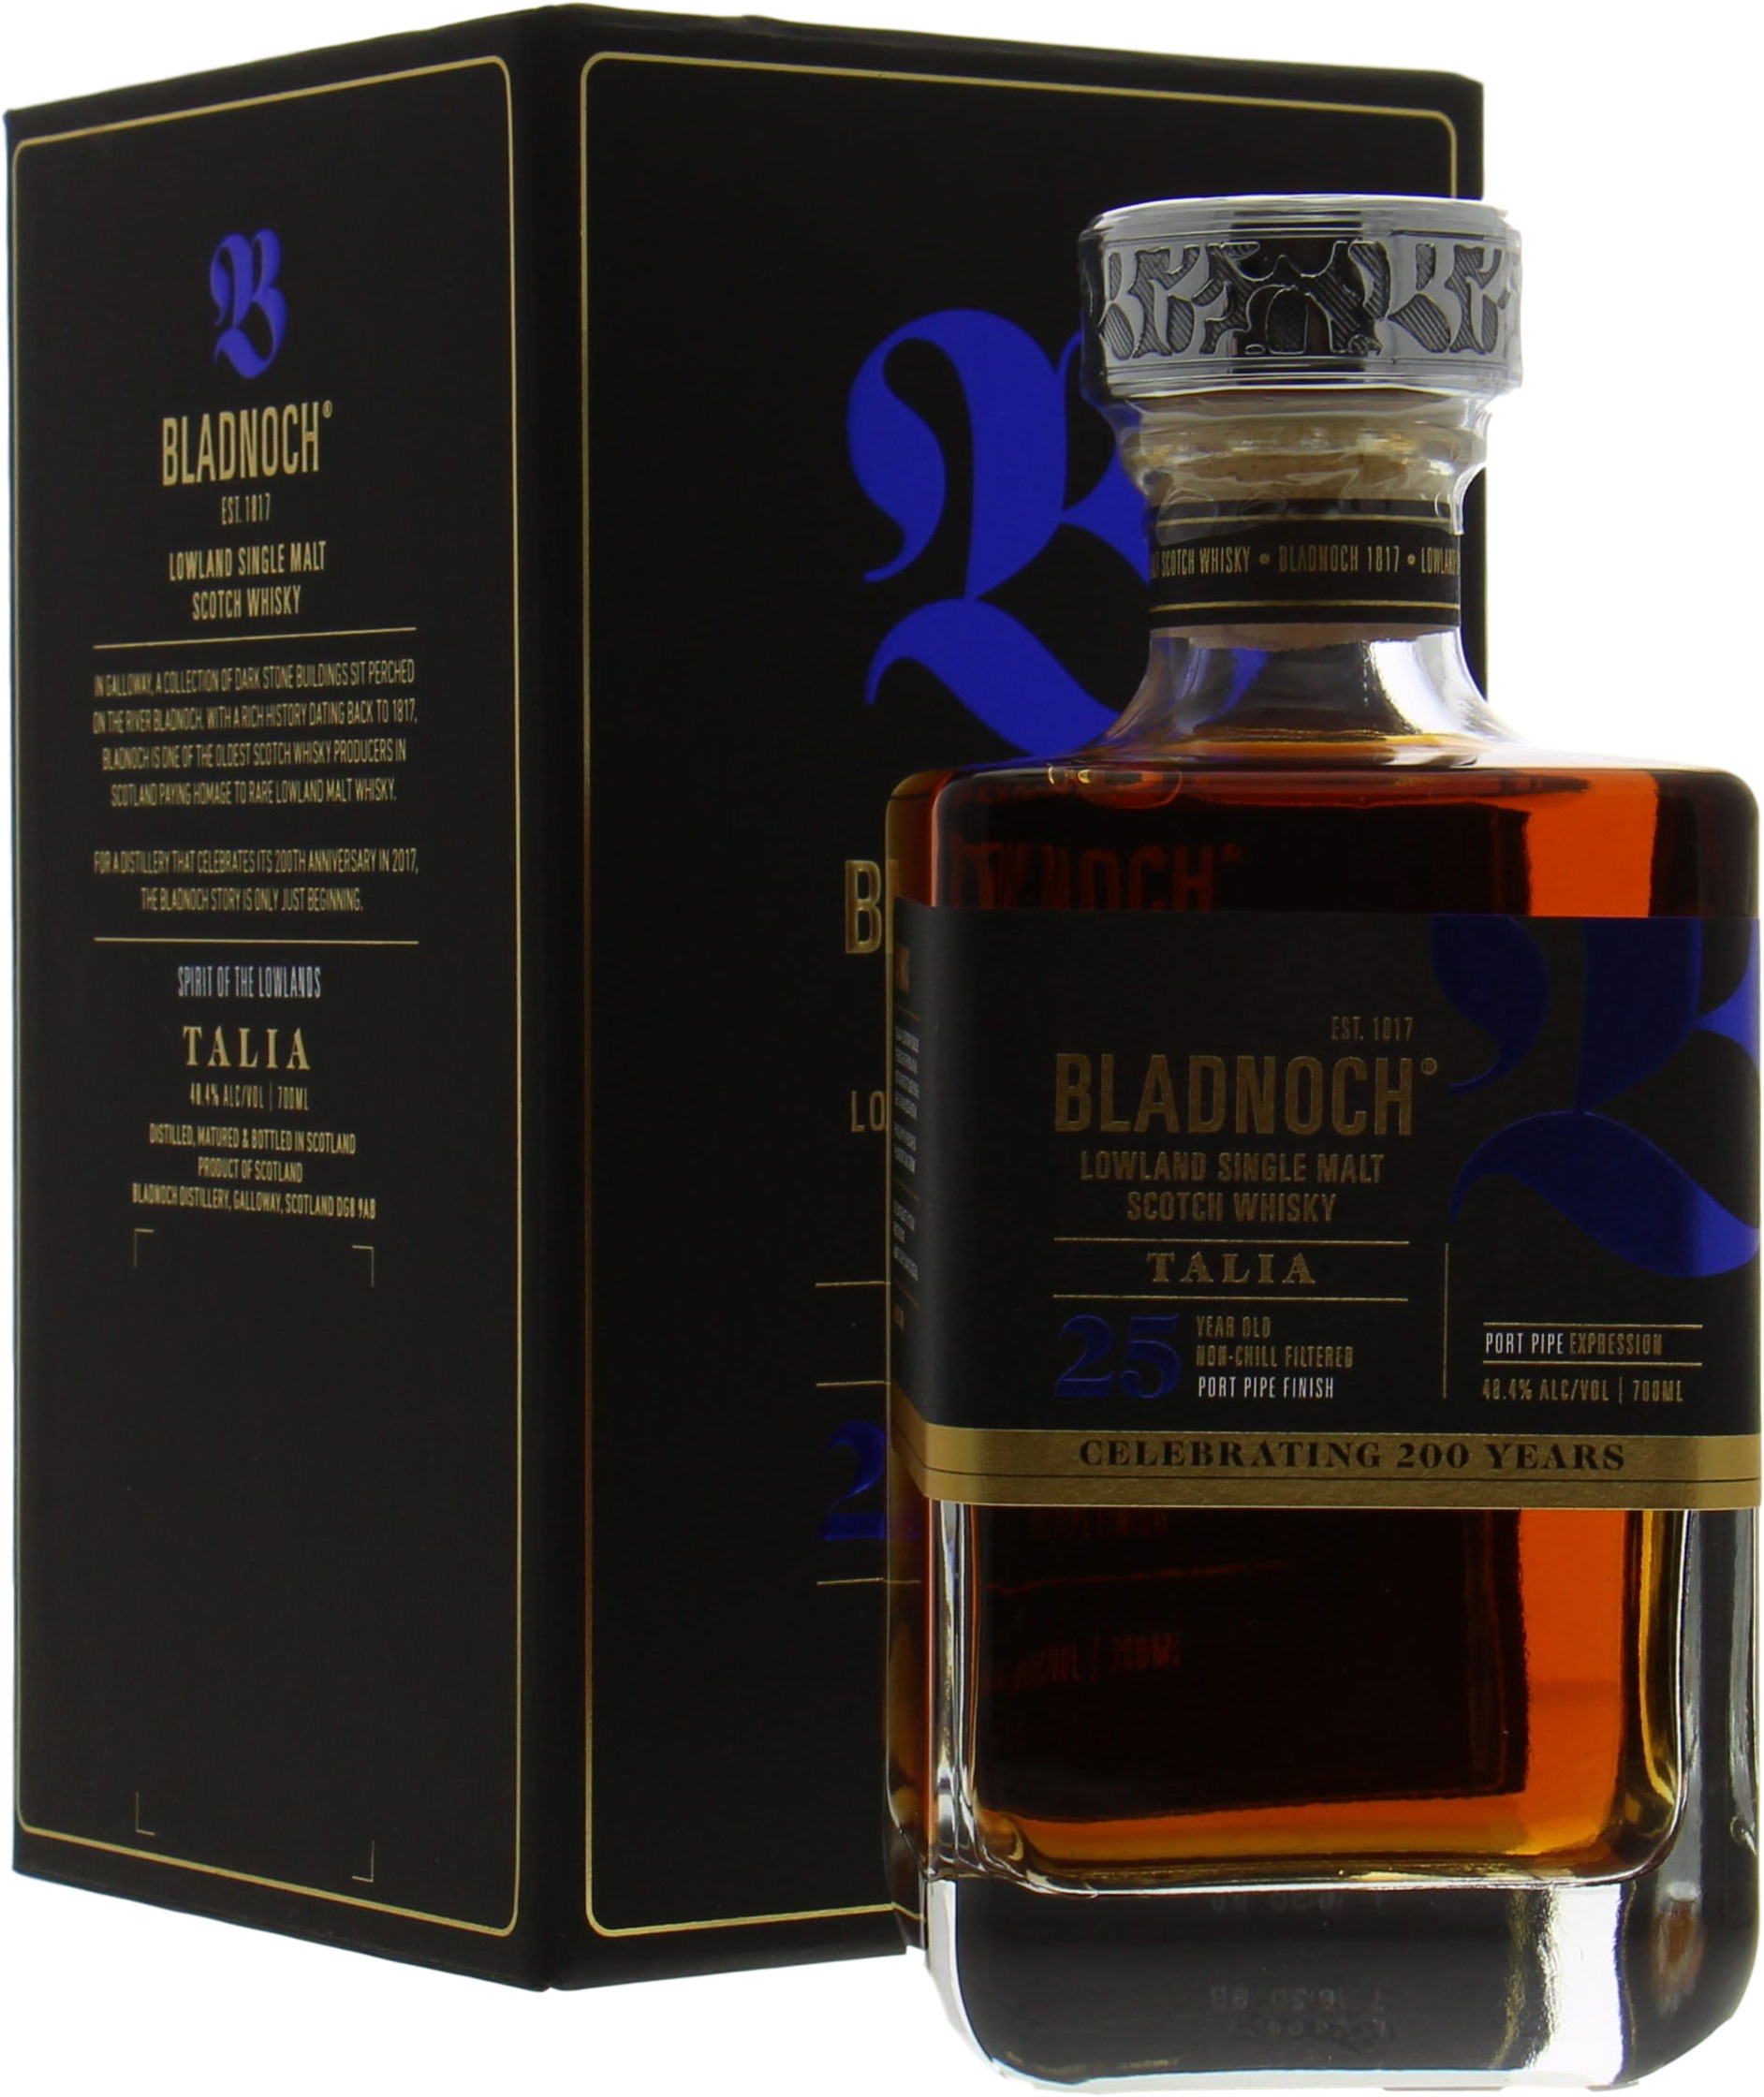 Bladnoch - Talia 25 Years Old Limited Release 48.4% NV In Original Wooden Case